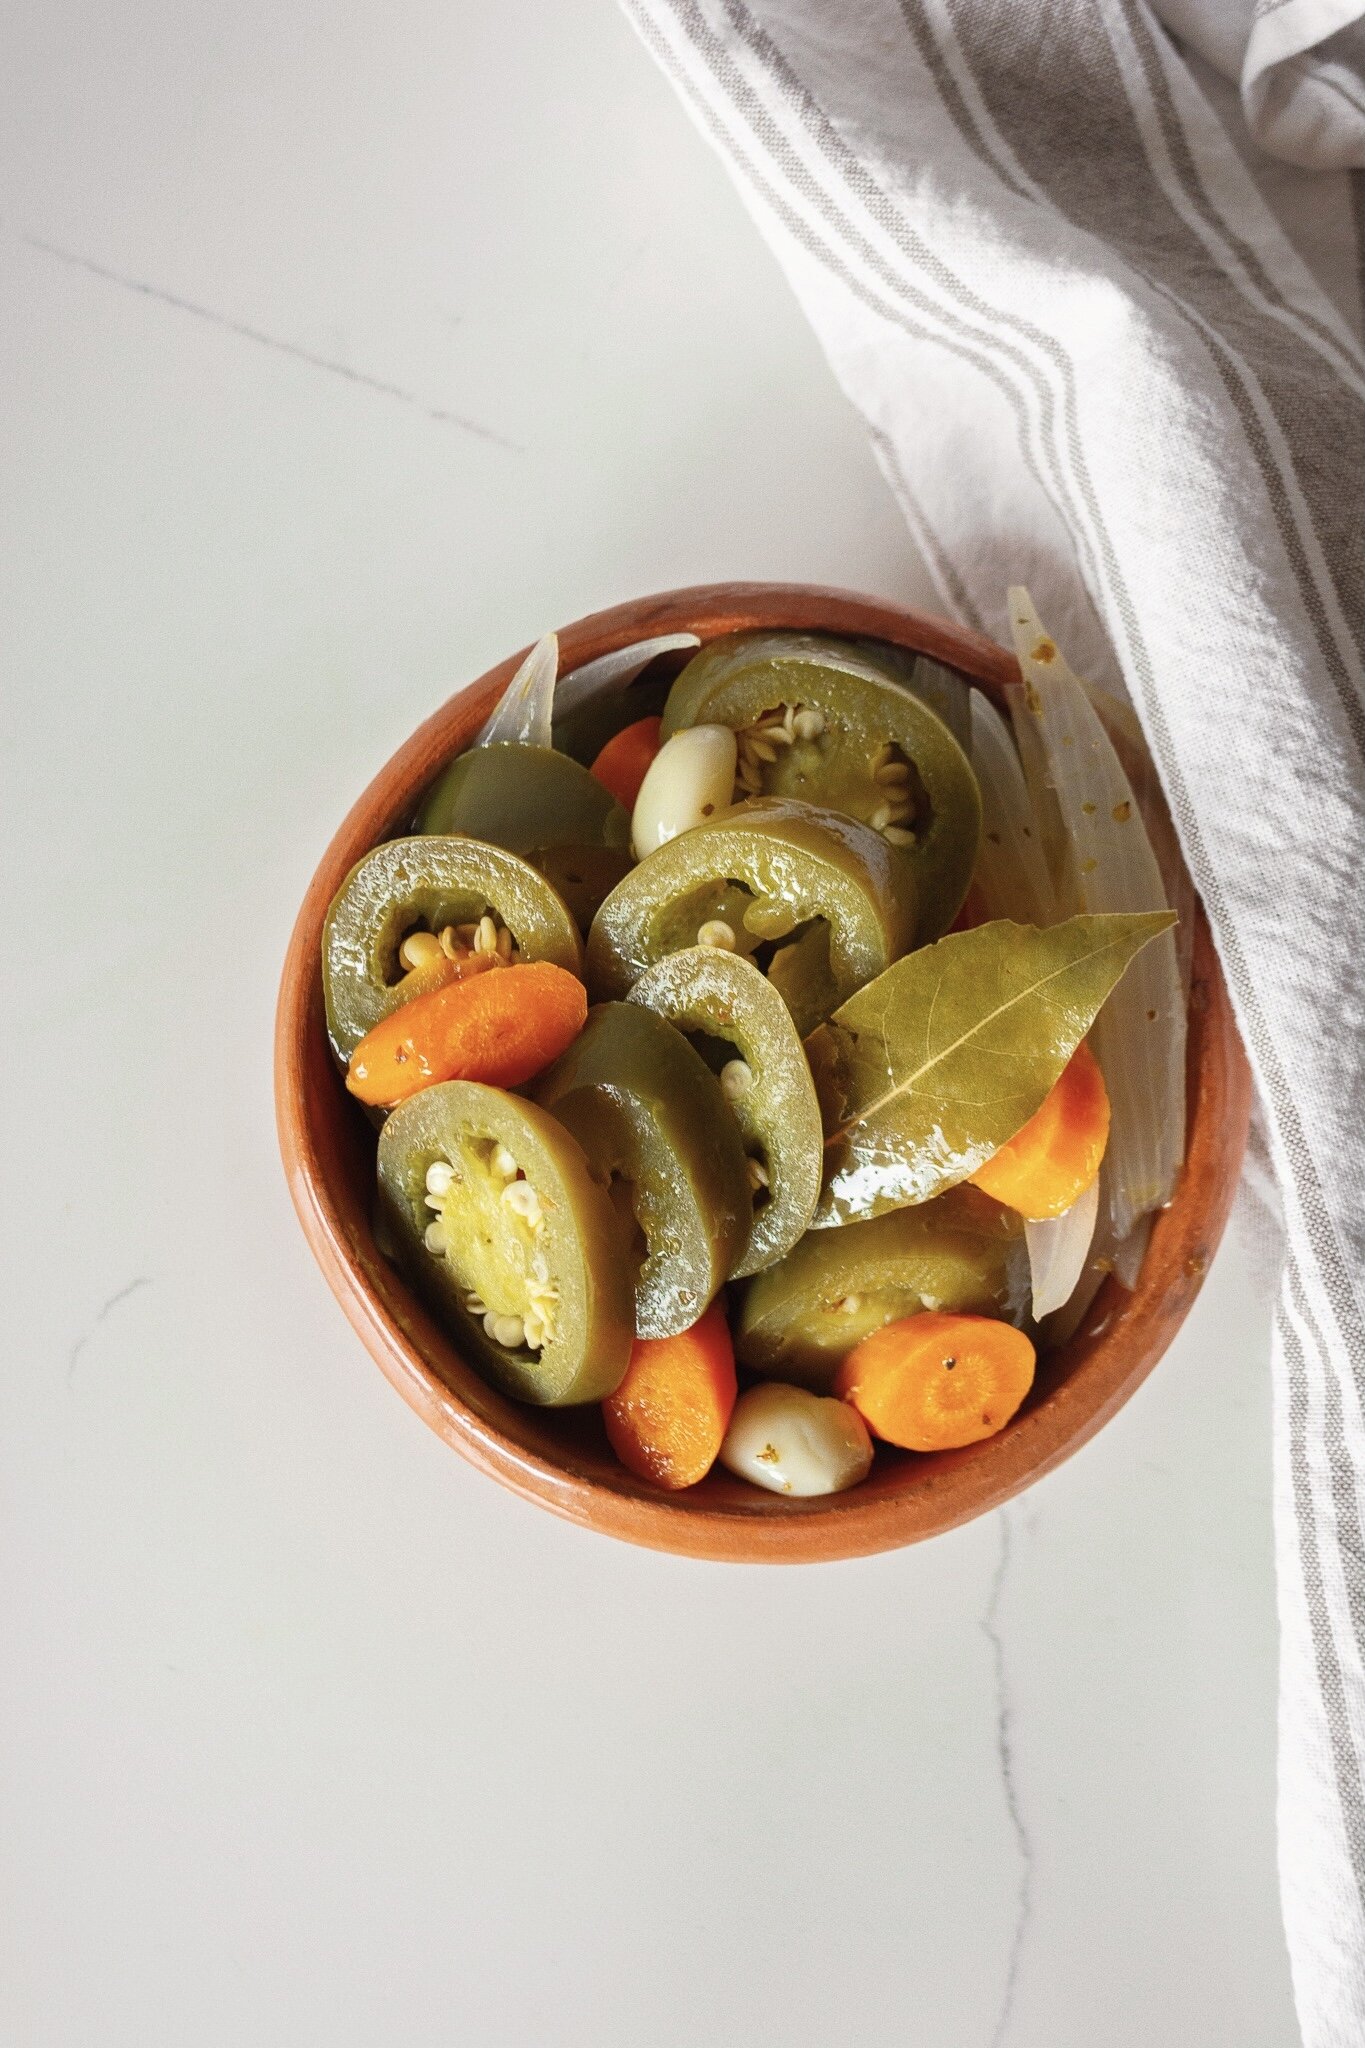 Storing the homemade escabeche in a glass container